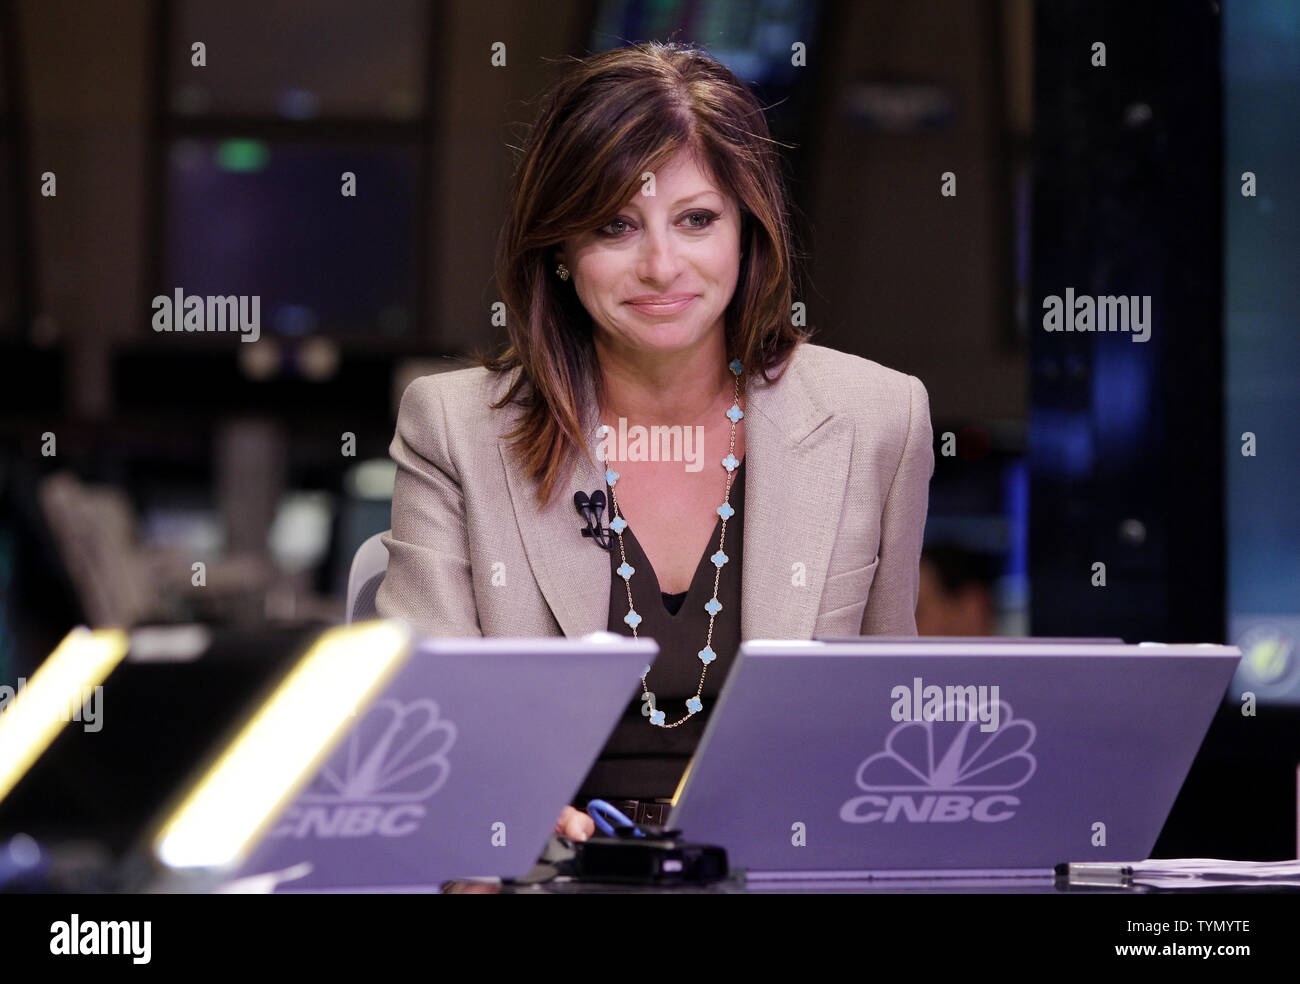 Maria Bartiromo, anchor of CNBC's 'Closing Bell', broadcasts from the floor of the New York Stock Exchange moments before the closing bell at the NYSE on Wall Street In New York City on April 23, 2012.    UPI/John Angelillo Stock Photo